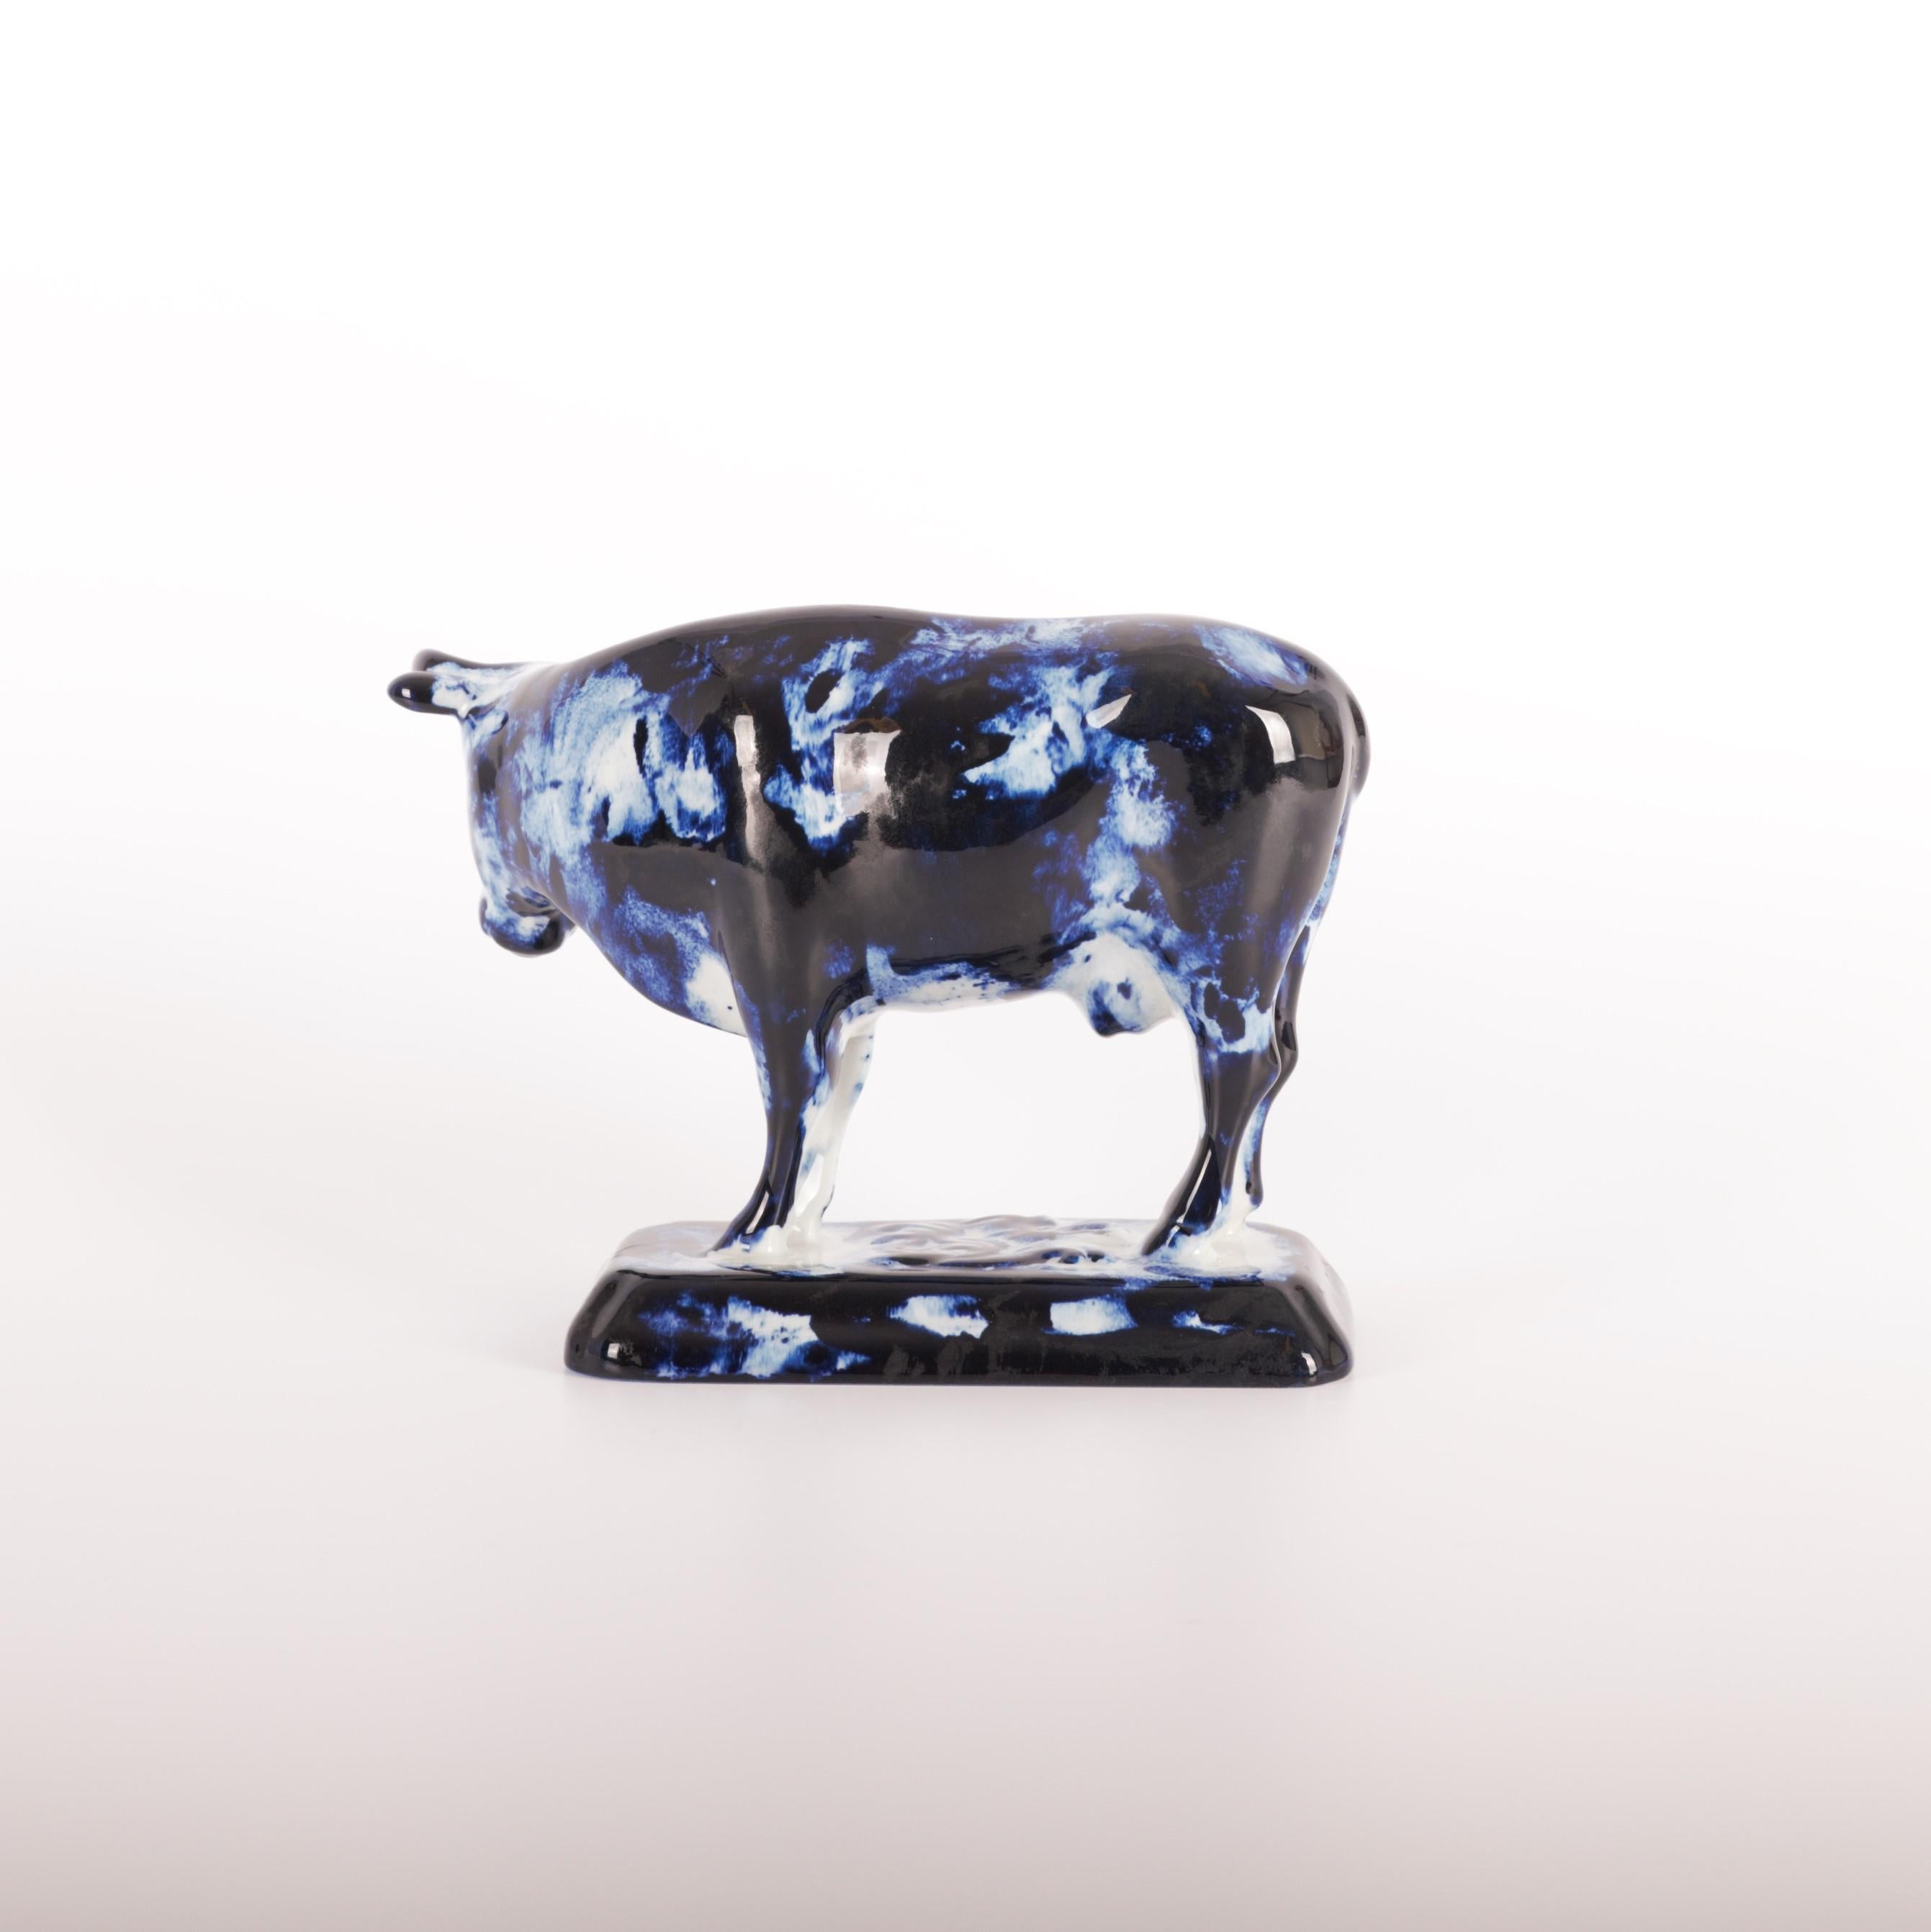 Glazed Delft Blue Cow #2, by Marcel Wanders, Hand Painted, 2006, Unique For Sale